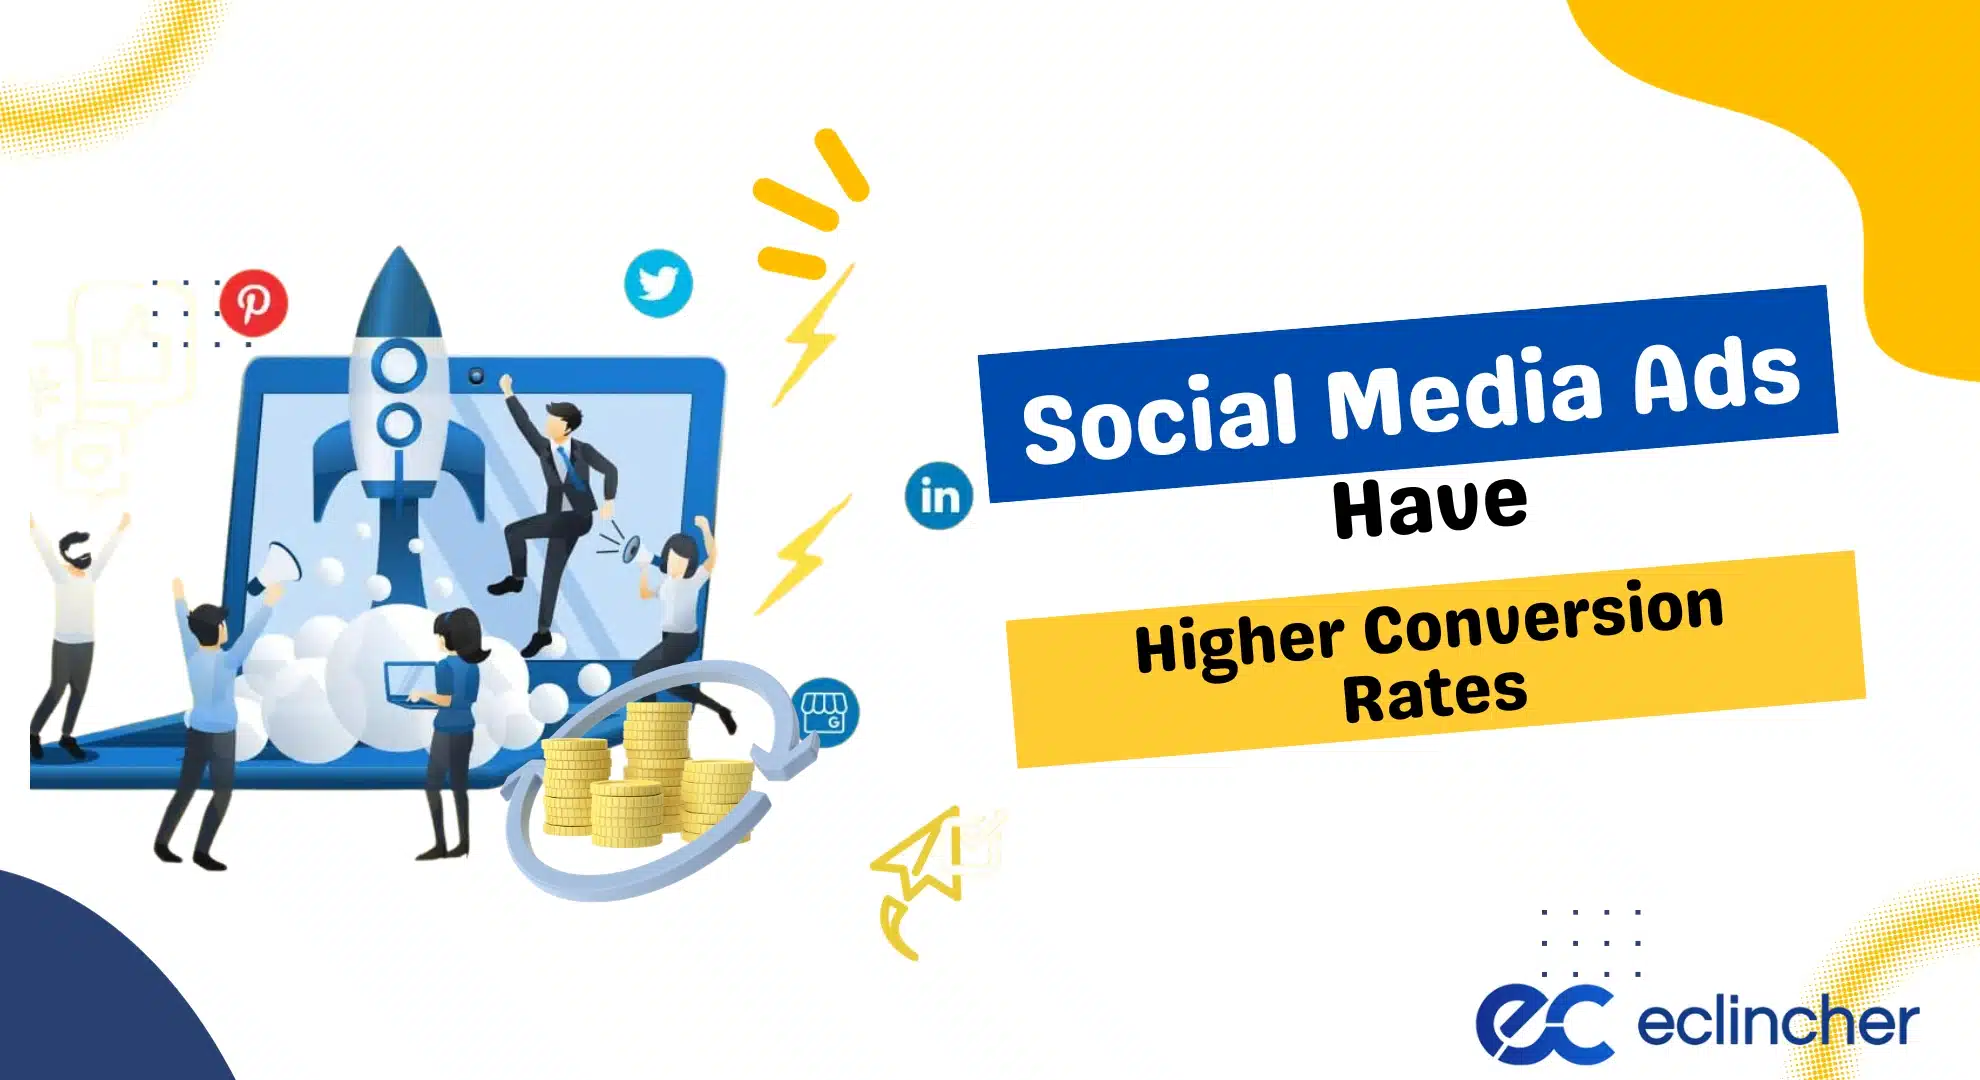 Social Media Ads Have Higher Conversion Rates